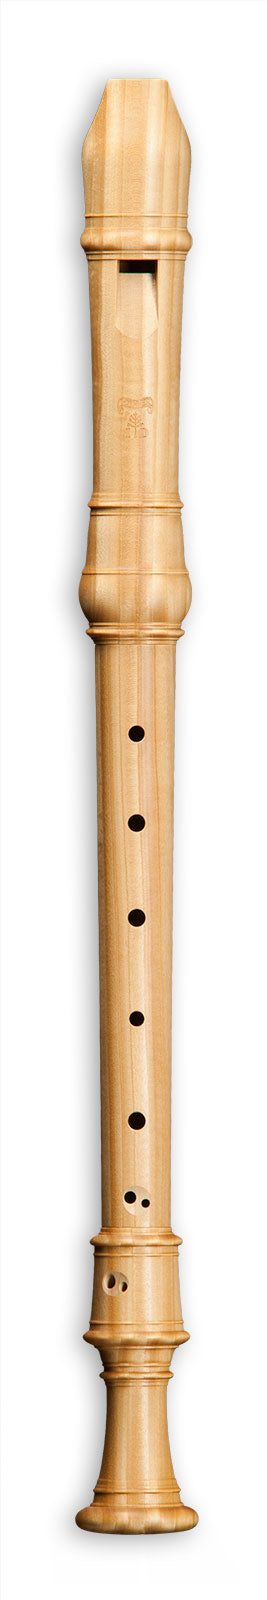 Ga door Maladroit Honger Mollenhauer Denner Edition Alto Recorder in Satinwood (a=415) at EMS —  Early Music Shop